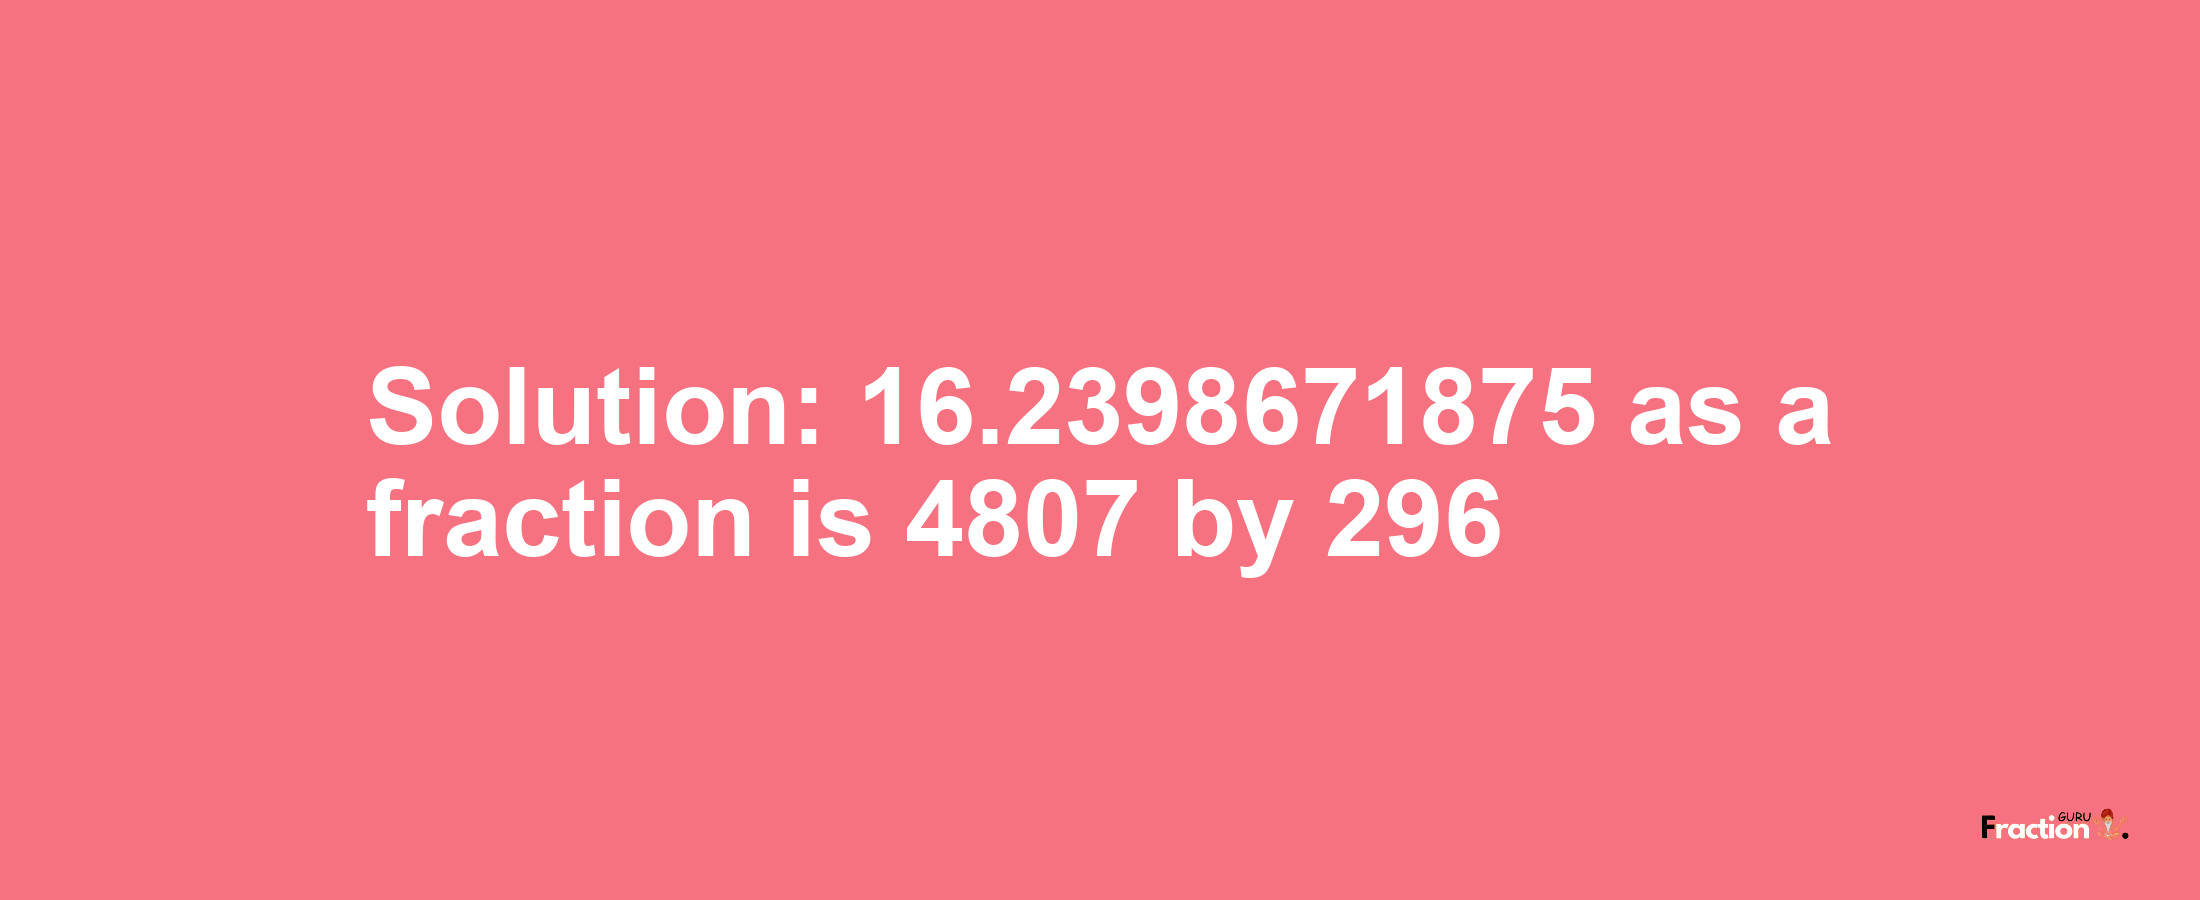 Solution:16.2398671875 as a fraction is 4807/296